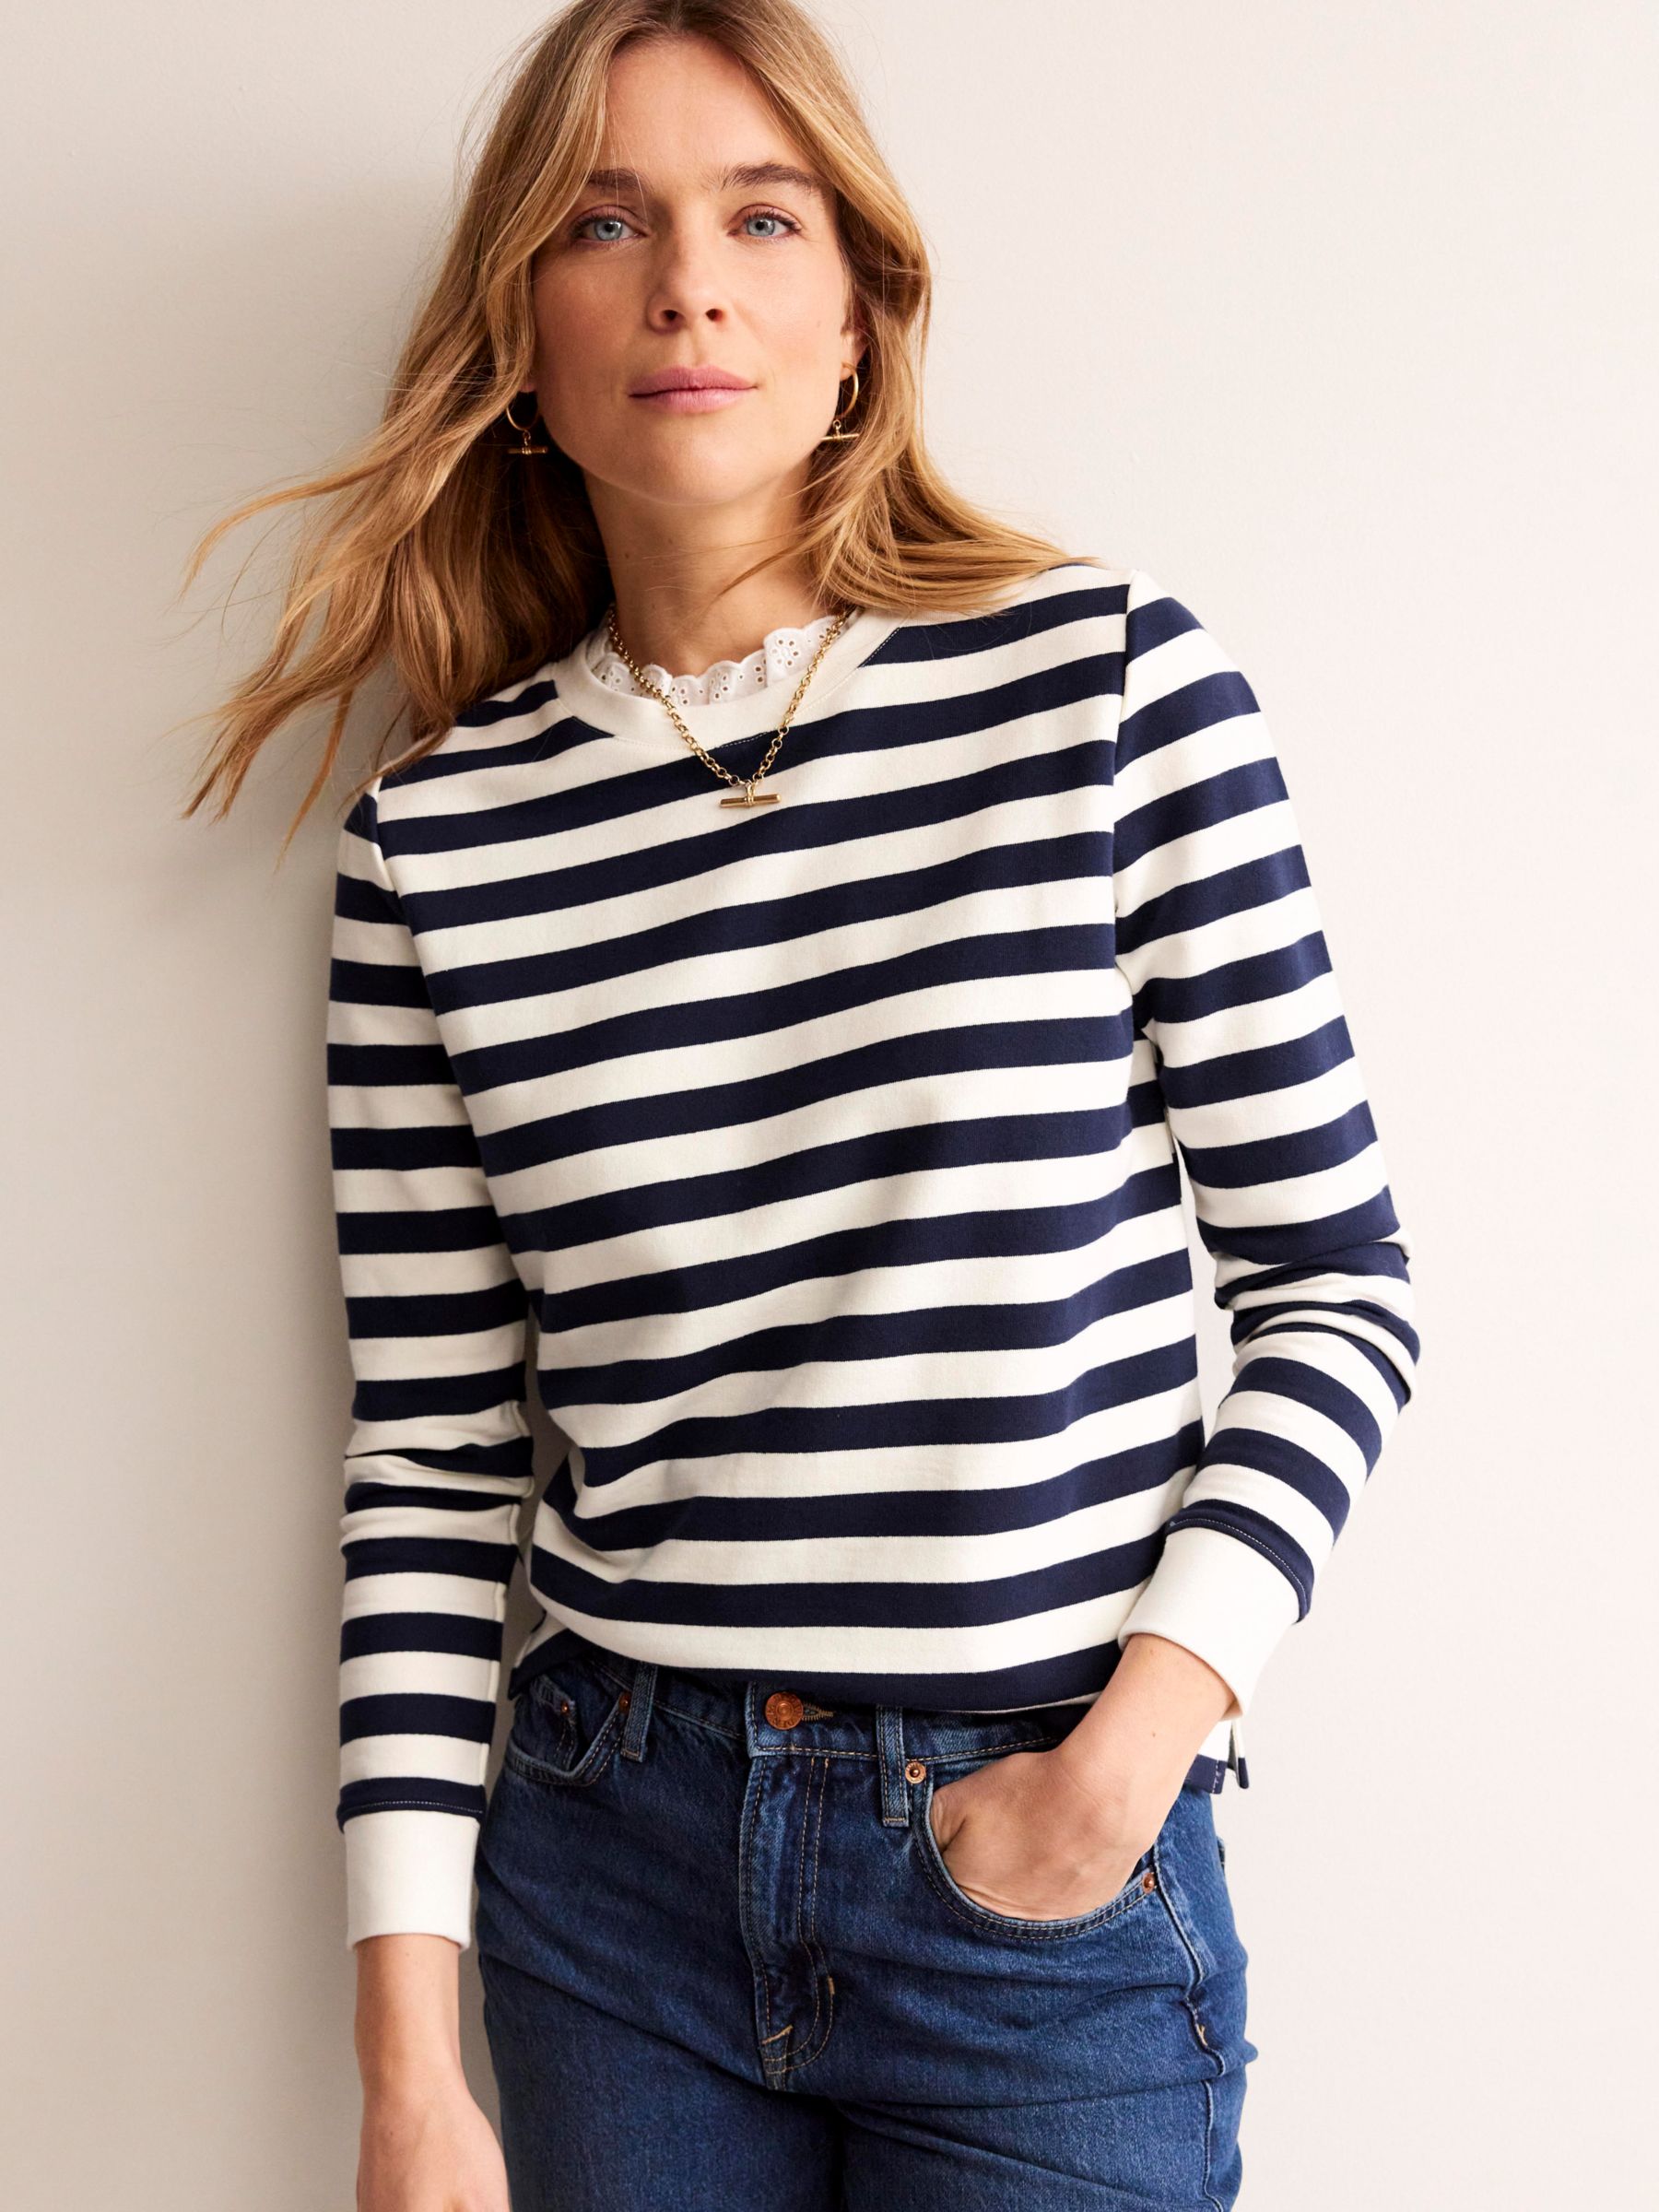 Boden Broderie Trim Striped Cotton Top, Ivory/Navy at John Lewis & Partners